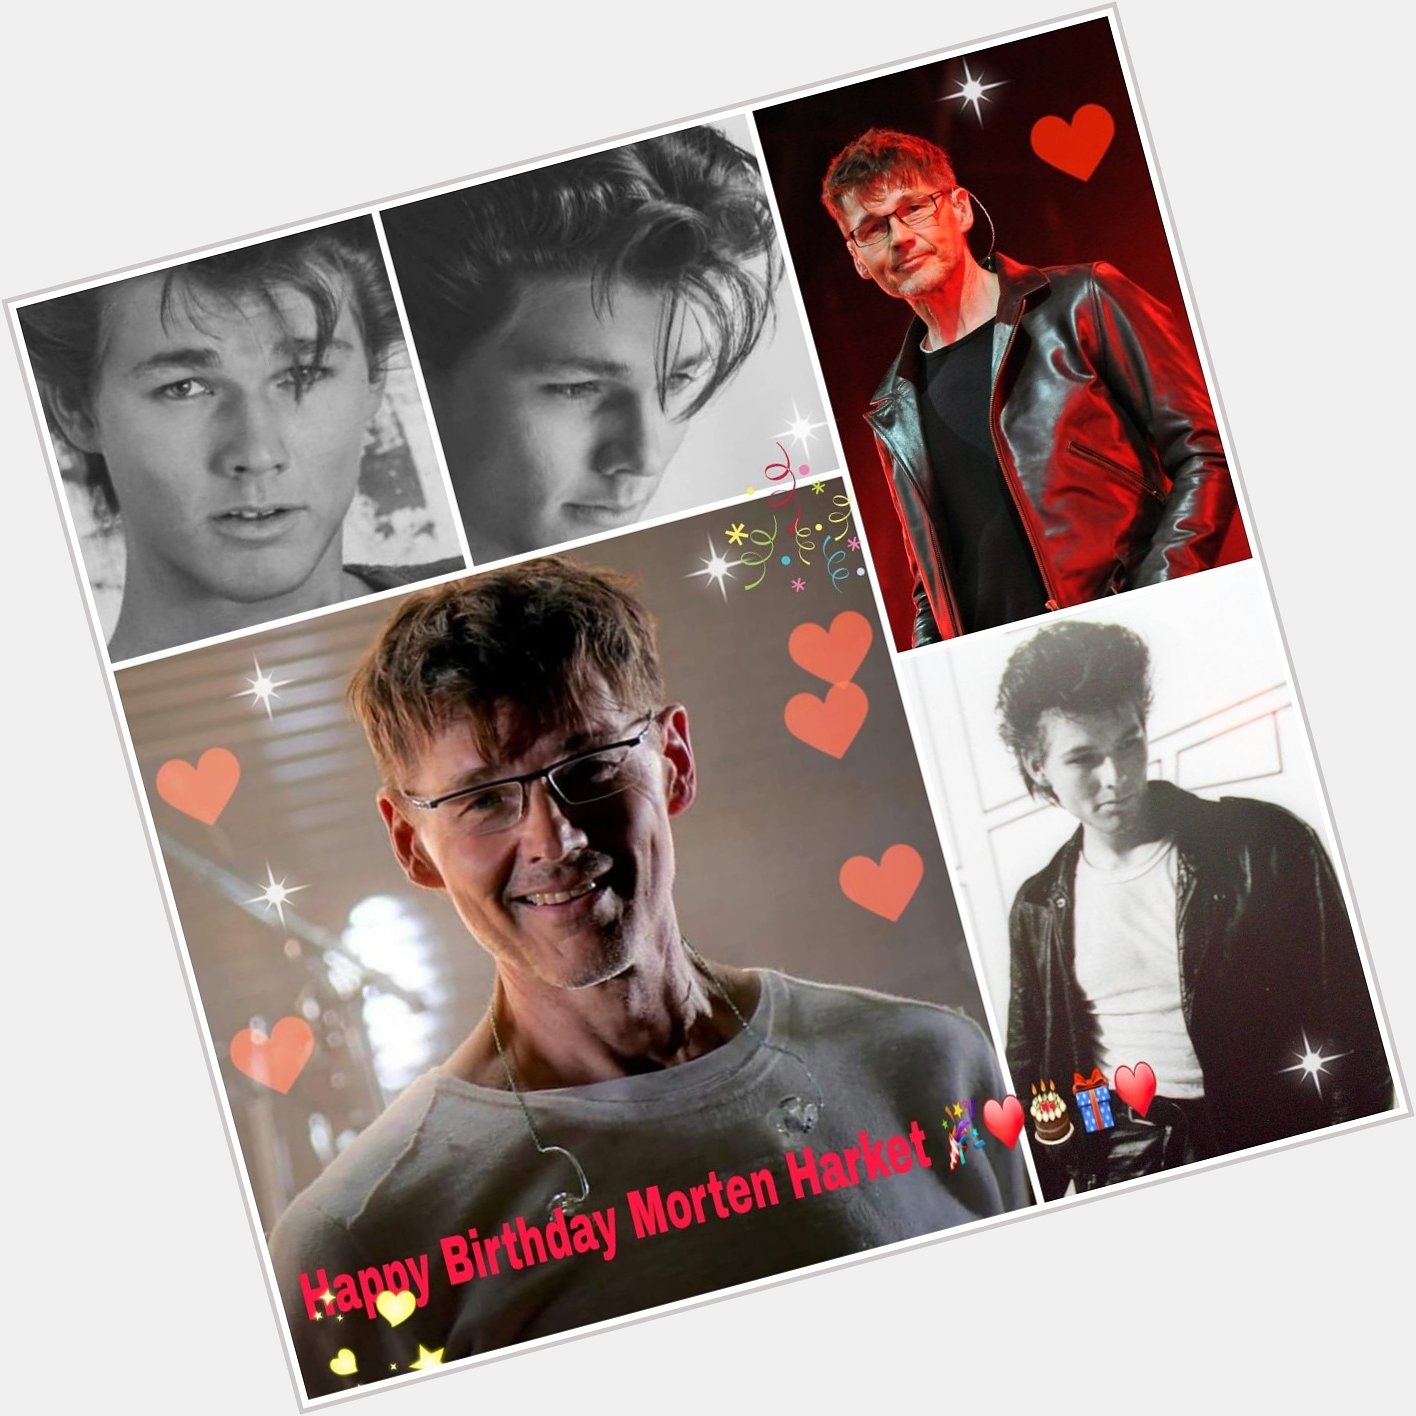 Happy Birthday Morten Harket       I wish you all the best and have a nice Day    